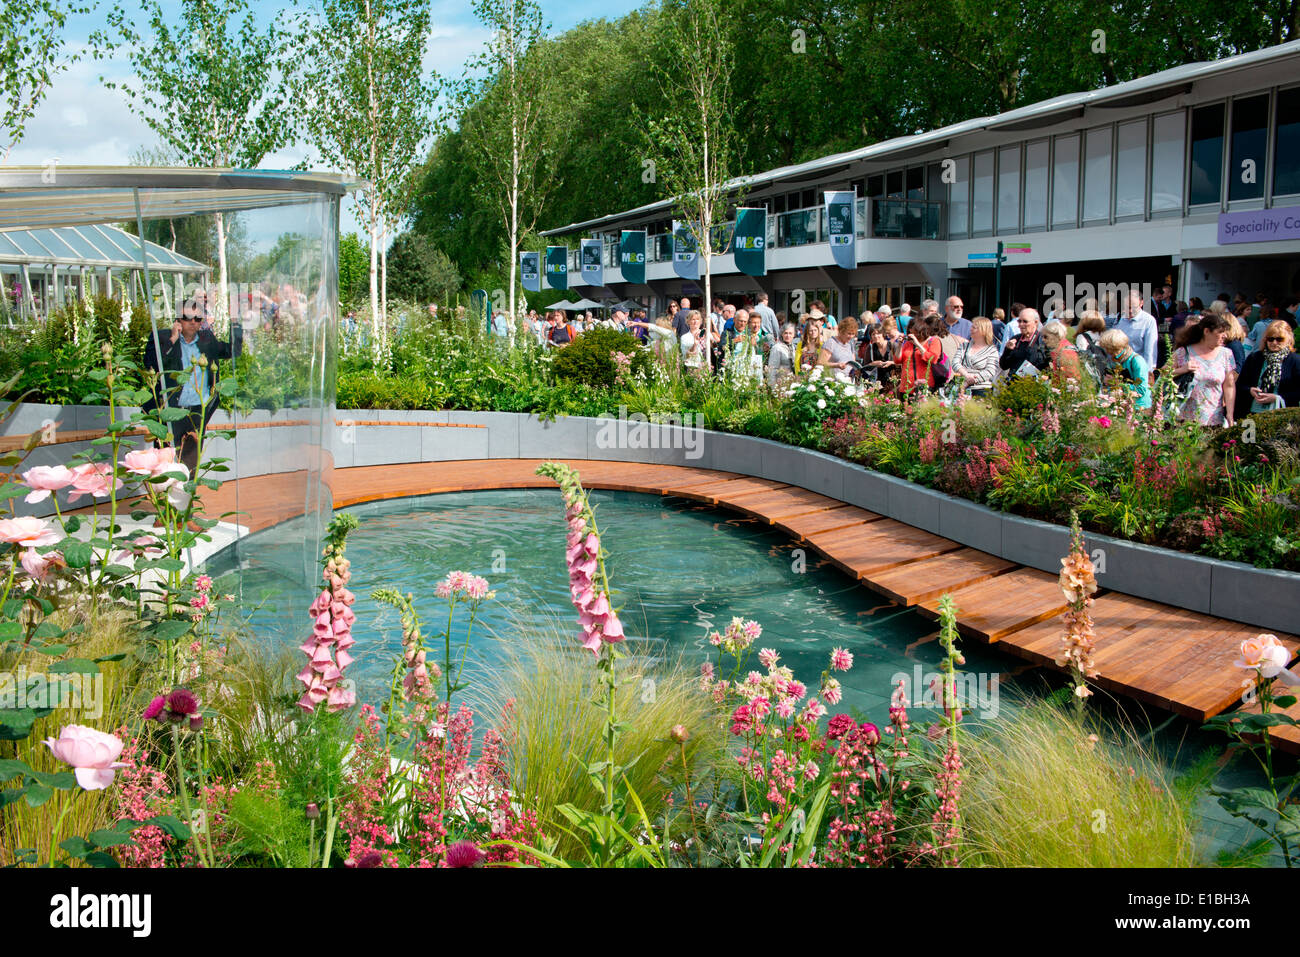 Crowds at the Chelsea Flower Show around the Positively Stoke-on-Trent Garden, London, UK Stock Photo